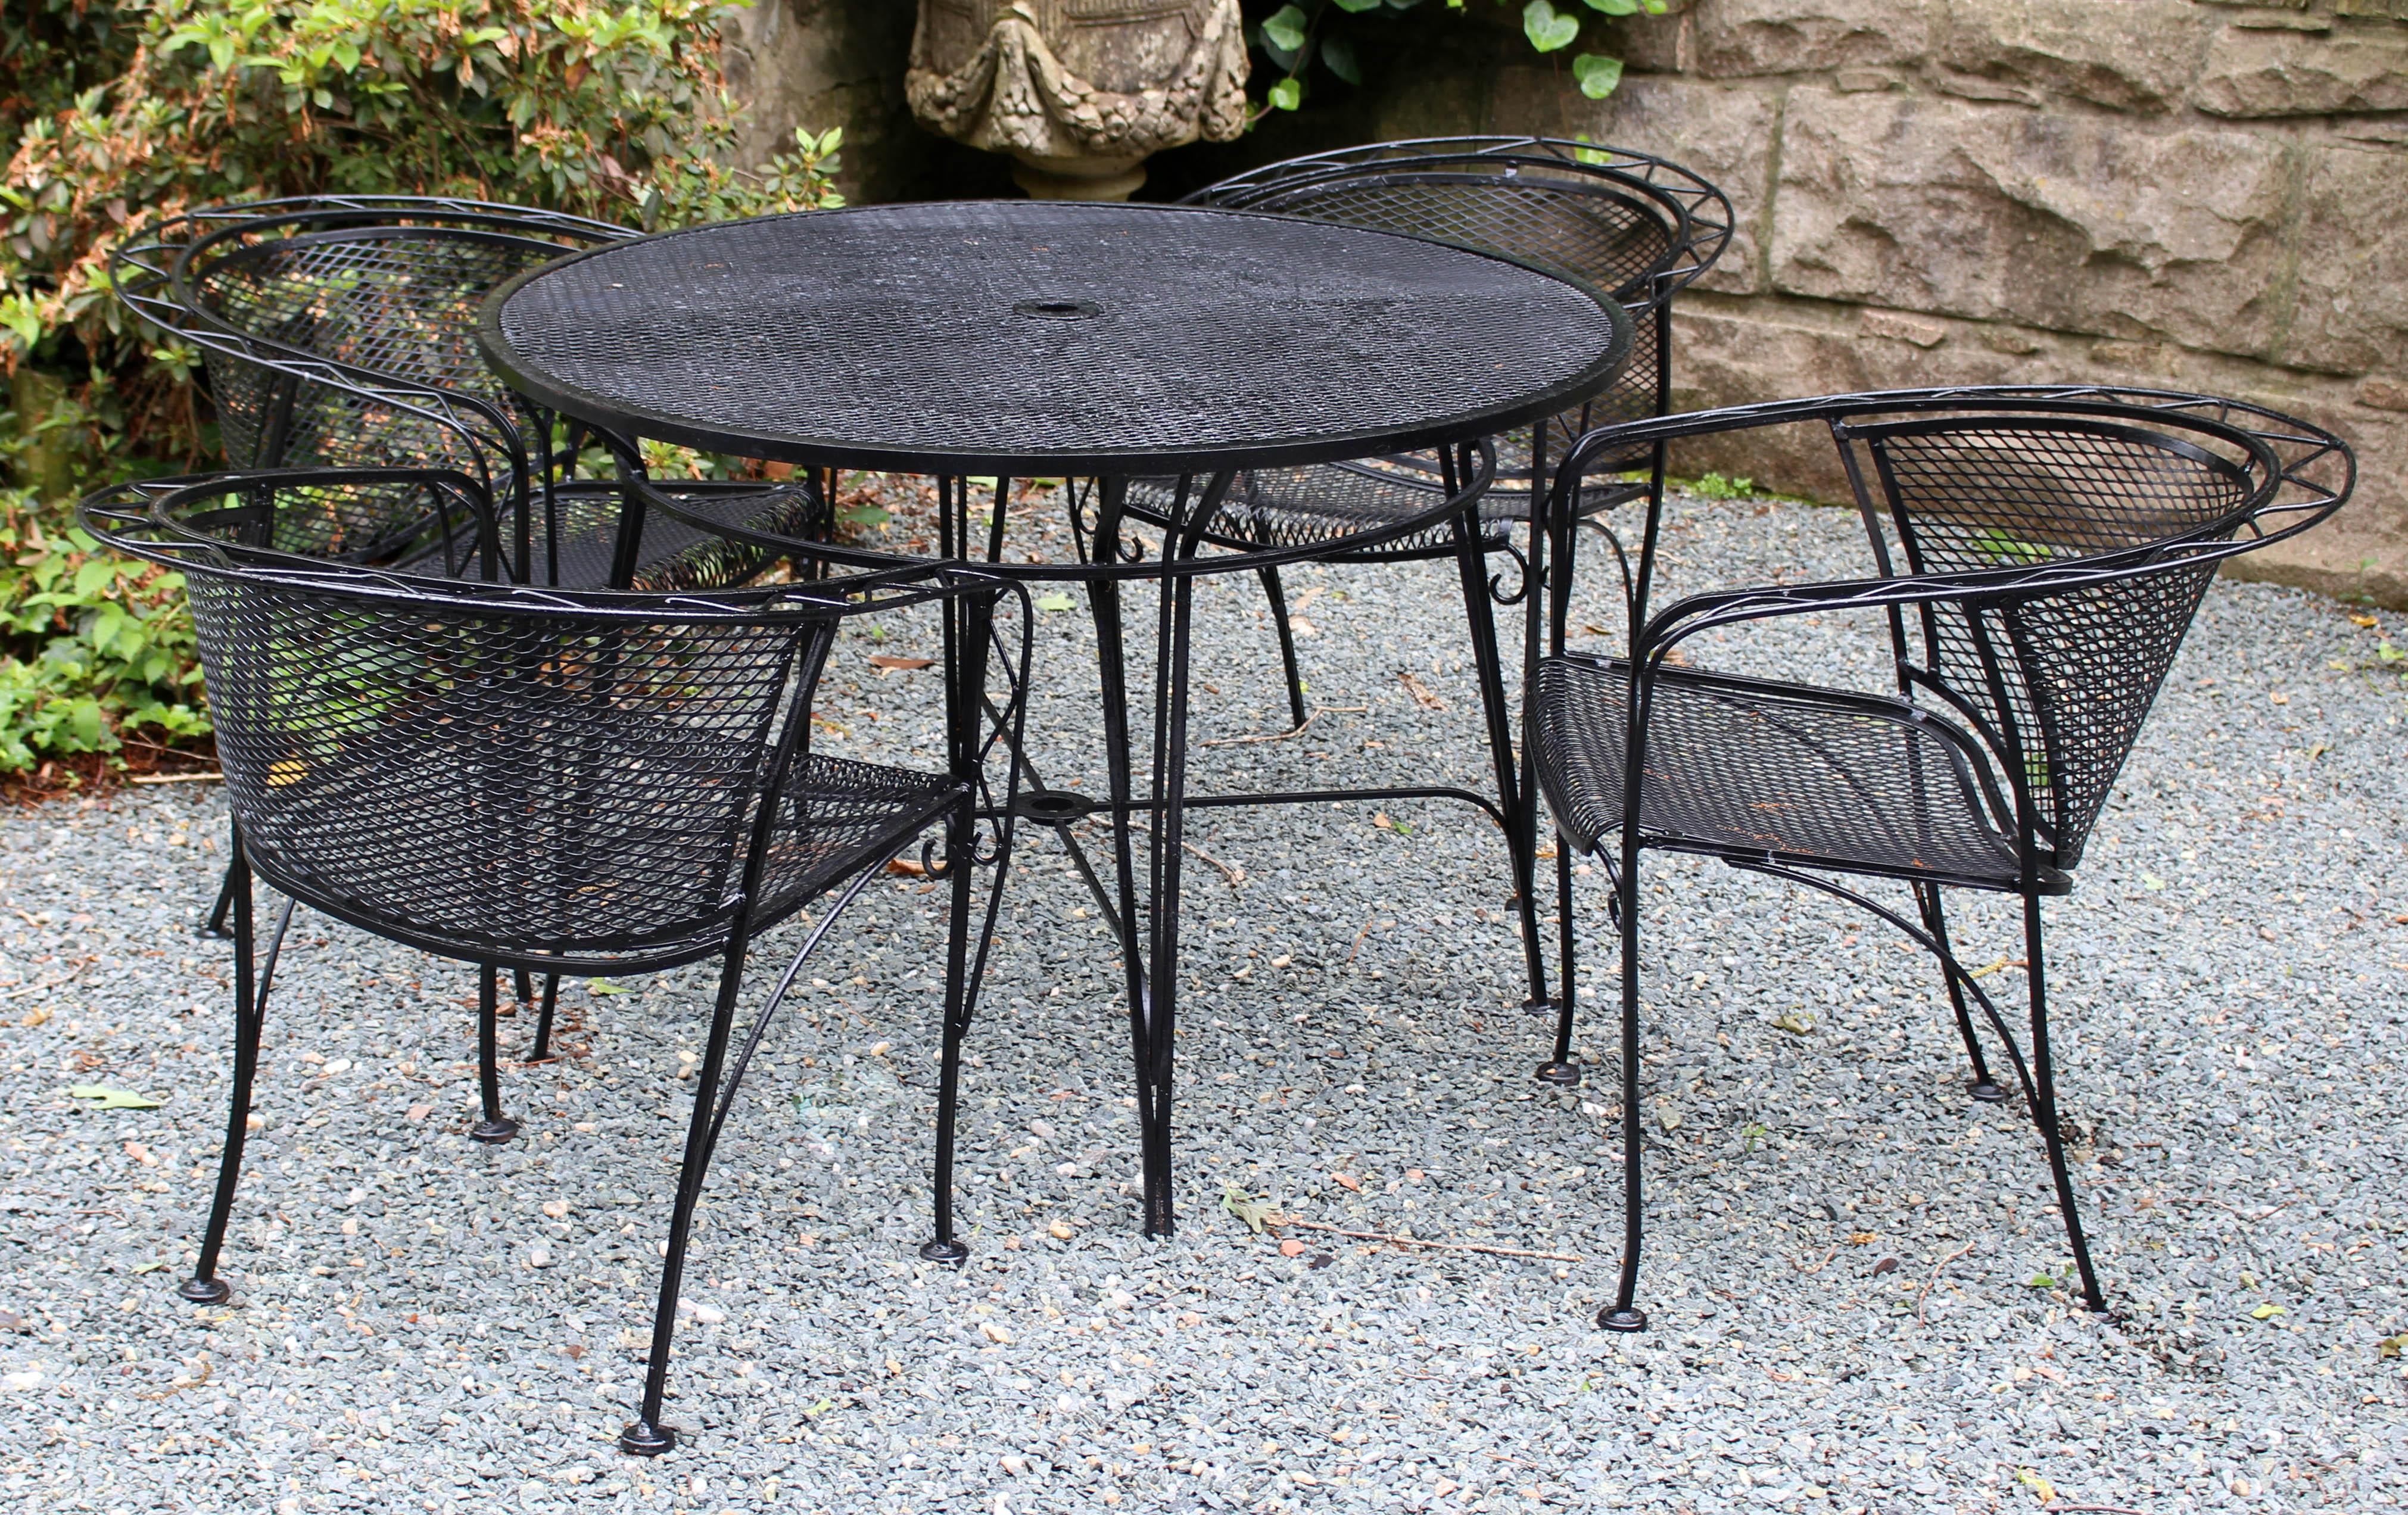 Wrought iron table and four tub chairs, c.1960s, from Style Craft of Chapel Hill. Most certainly Woodard. Unusual saw tooth arm motif. Very stable umbrella stand table base form. Repainted over the years. Table: 42